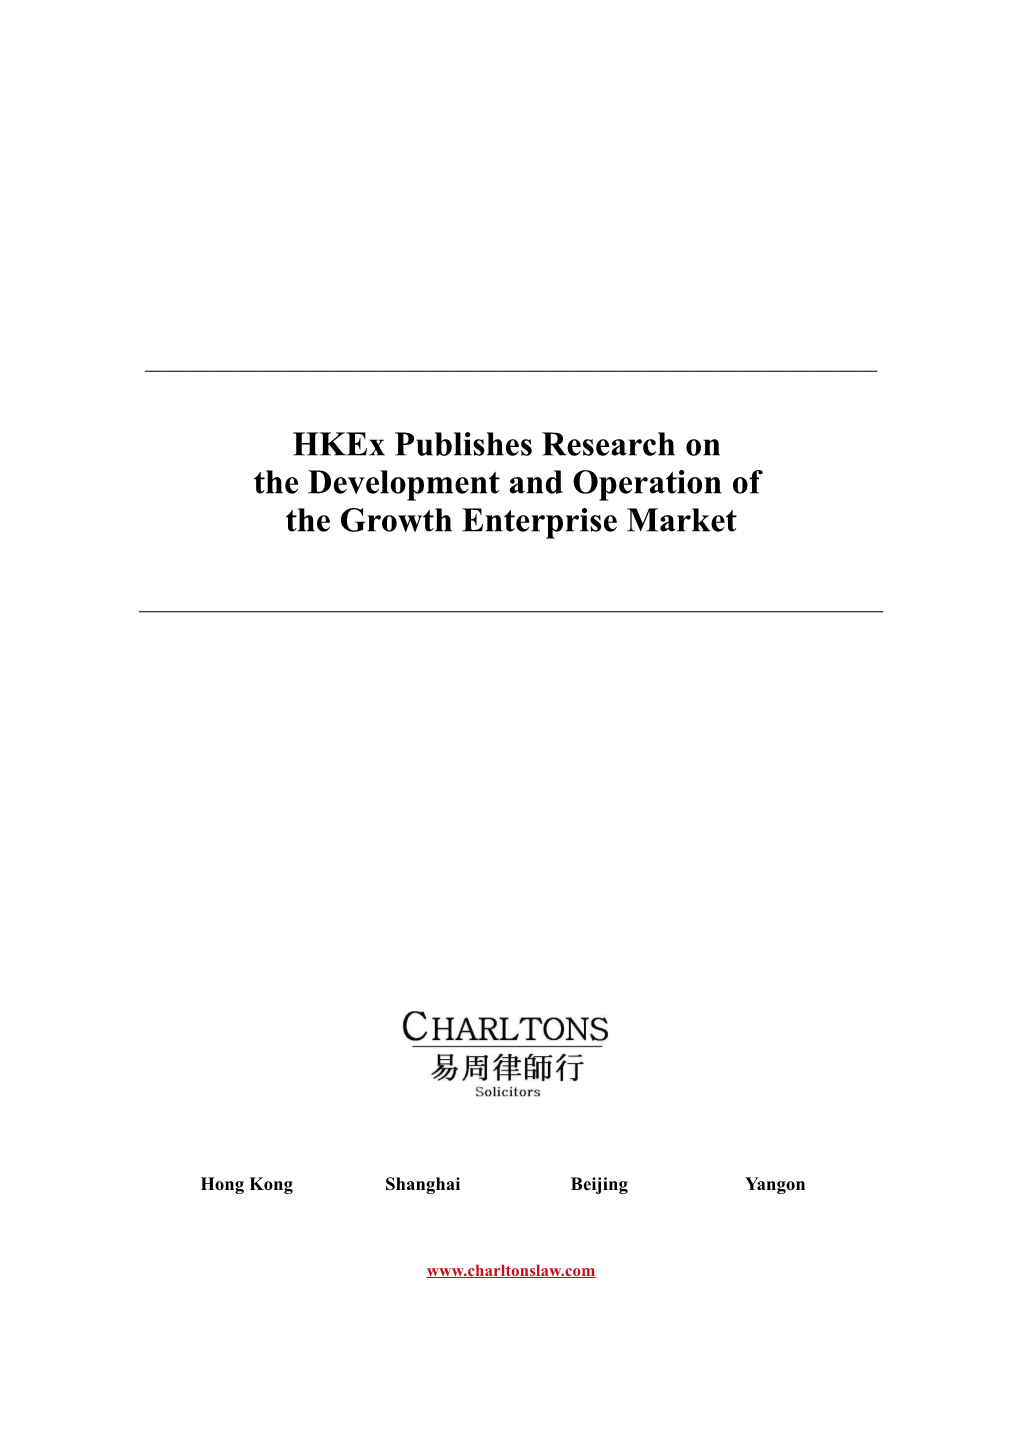 Hkex PUBLISHES RESEARCH on the DEVELOPMENT and OPERATION of the GROWTH ENTERPRISE MARKET